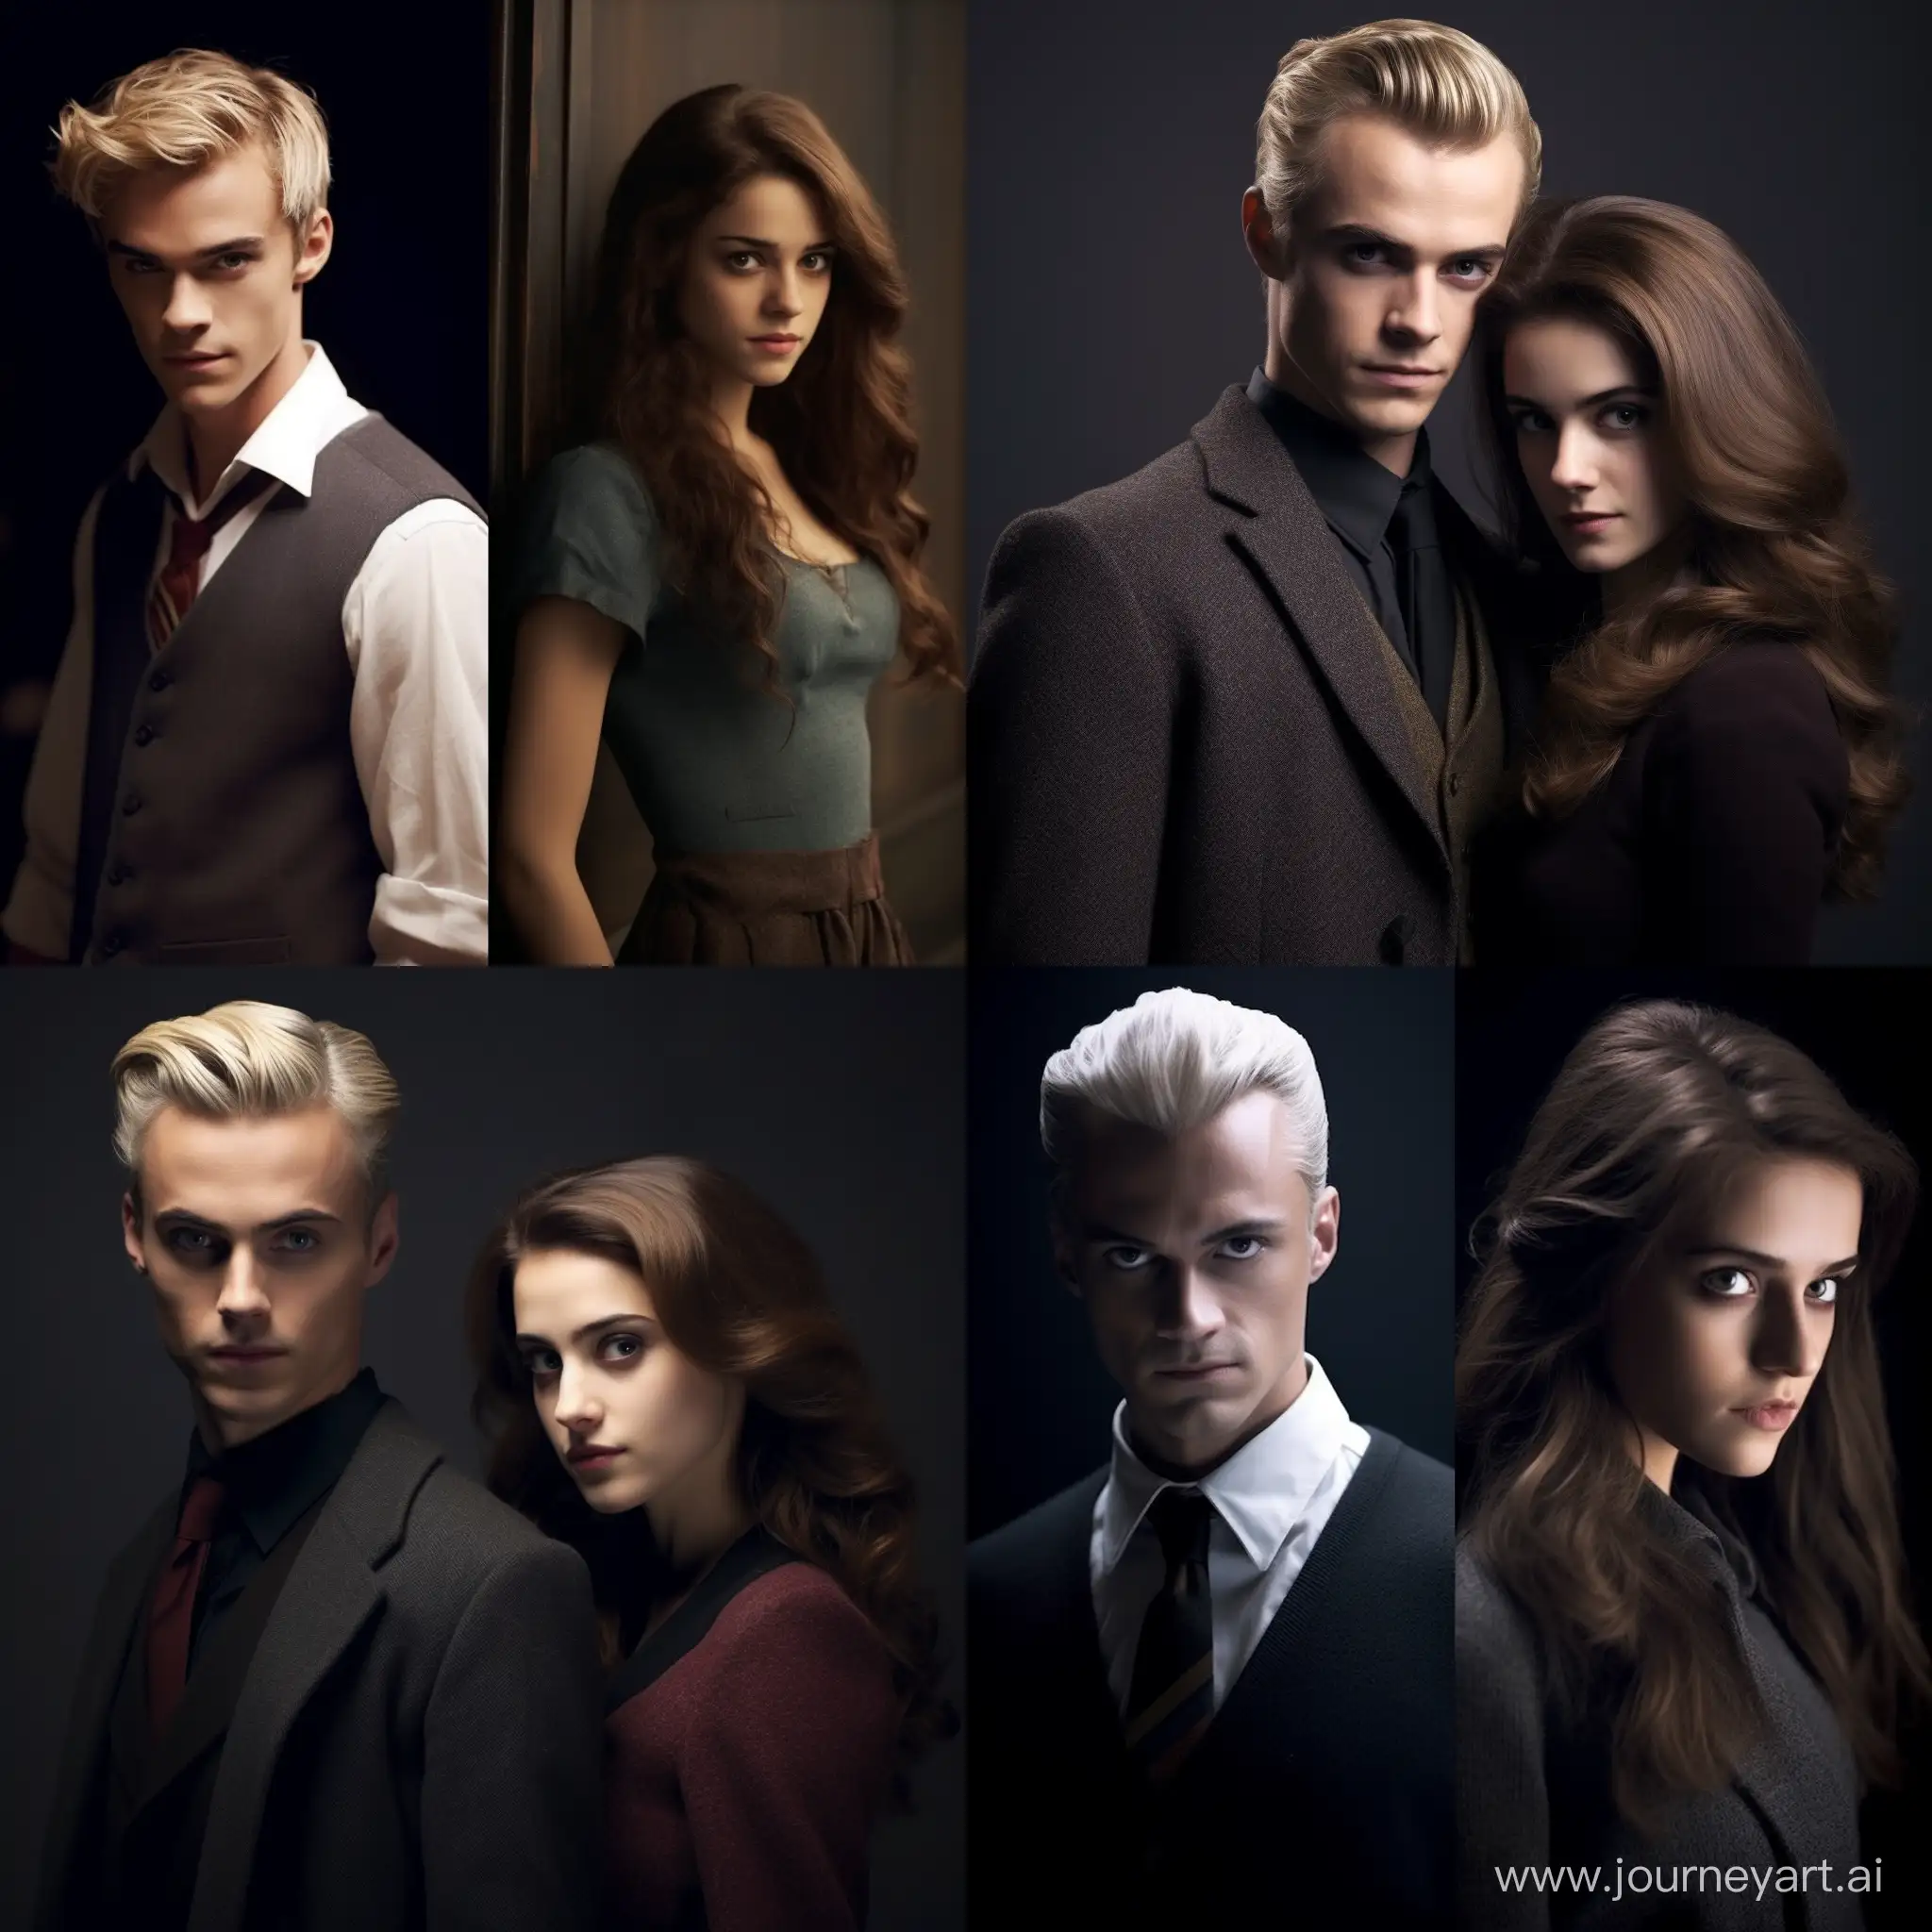 Draco Malfoy and Hermione Granger. Hermione is brunette!